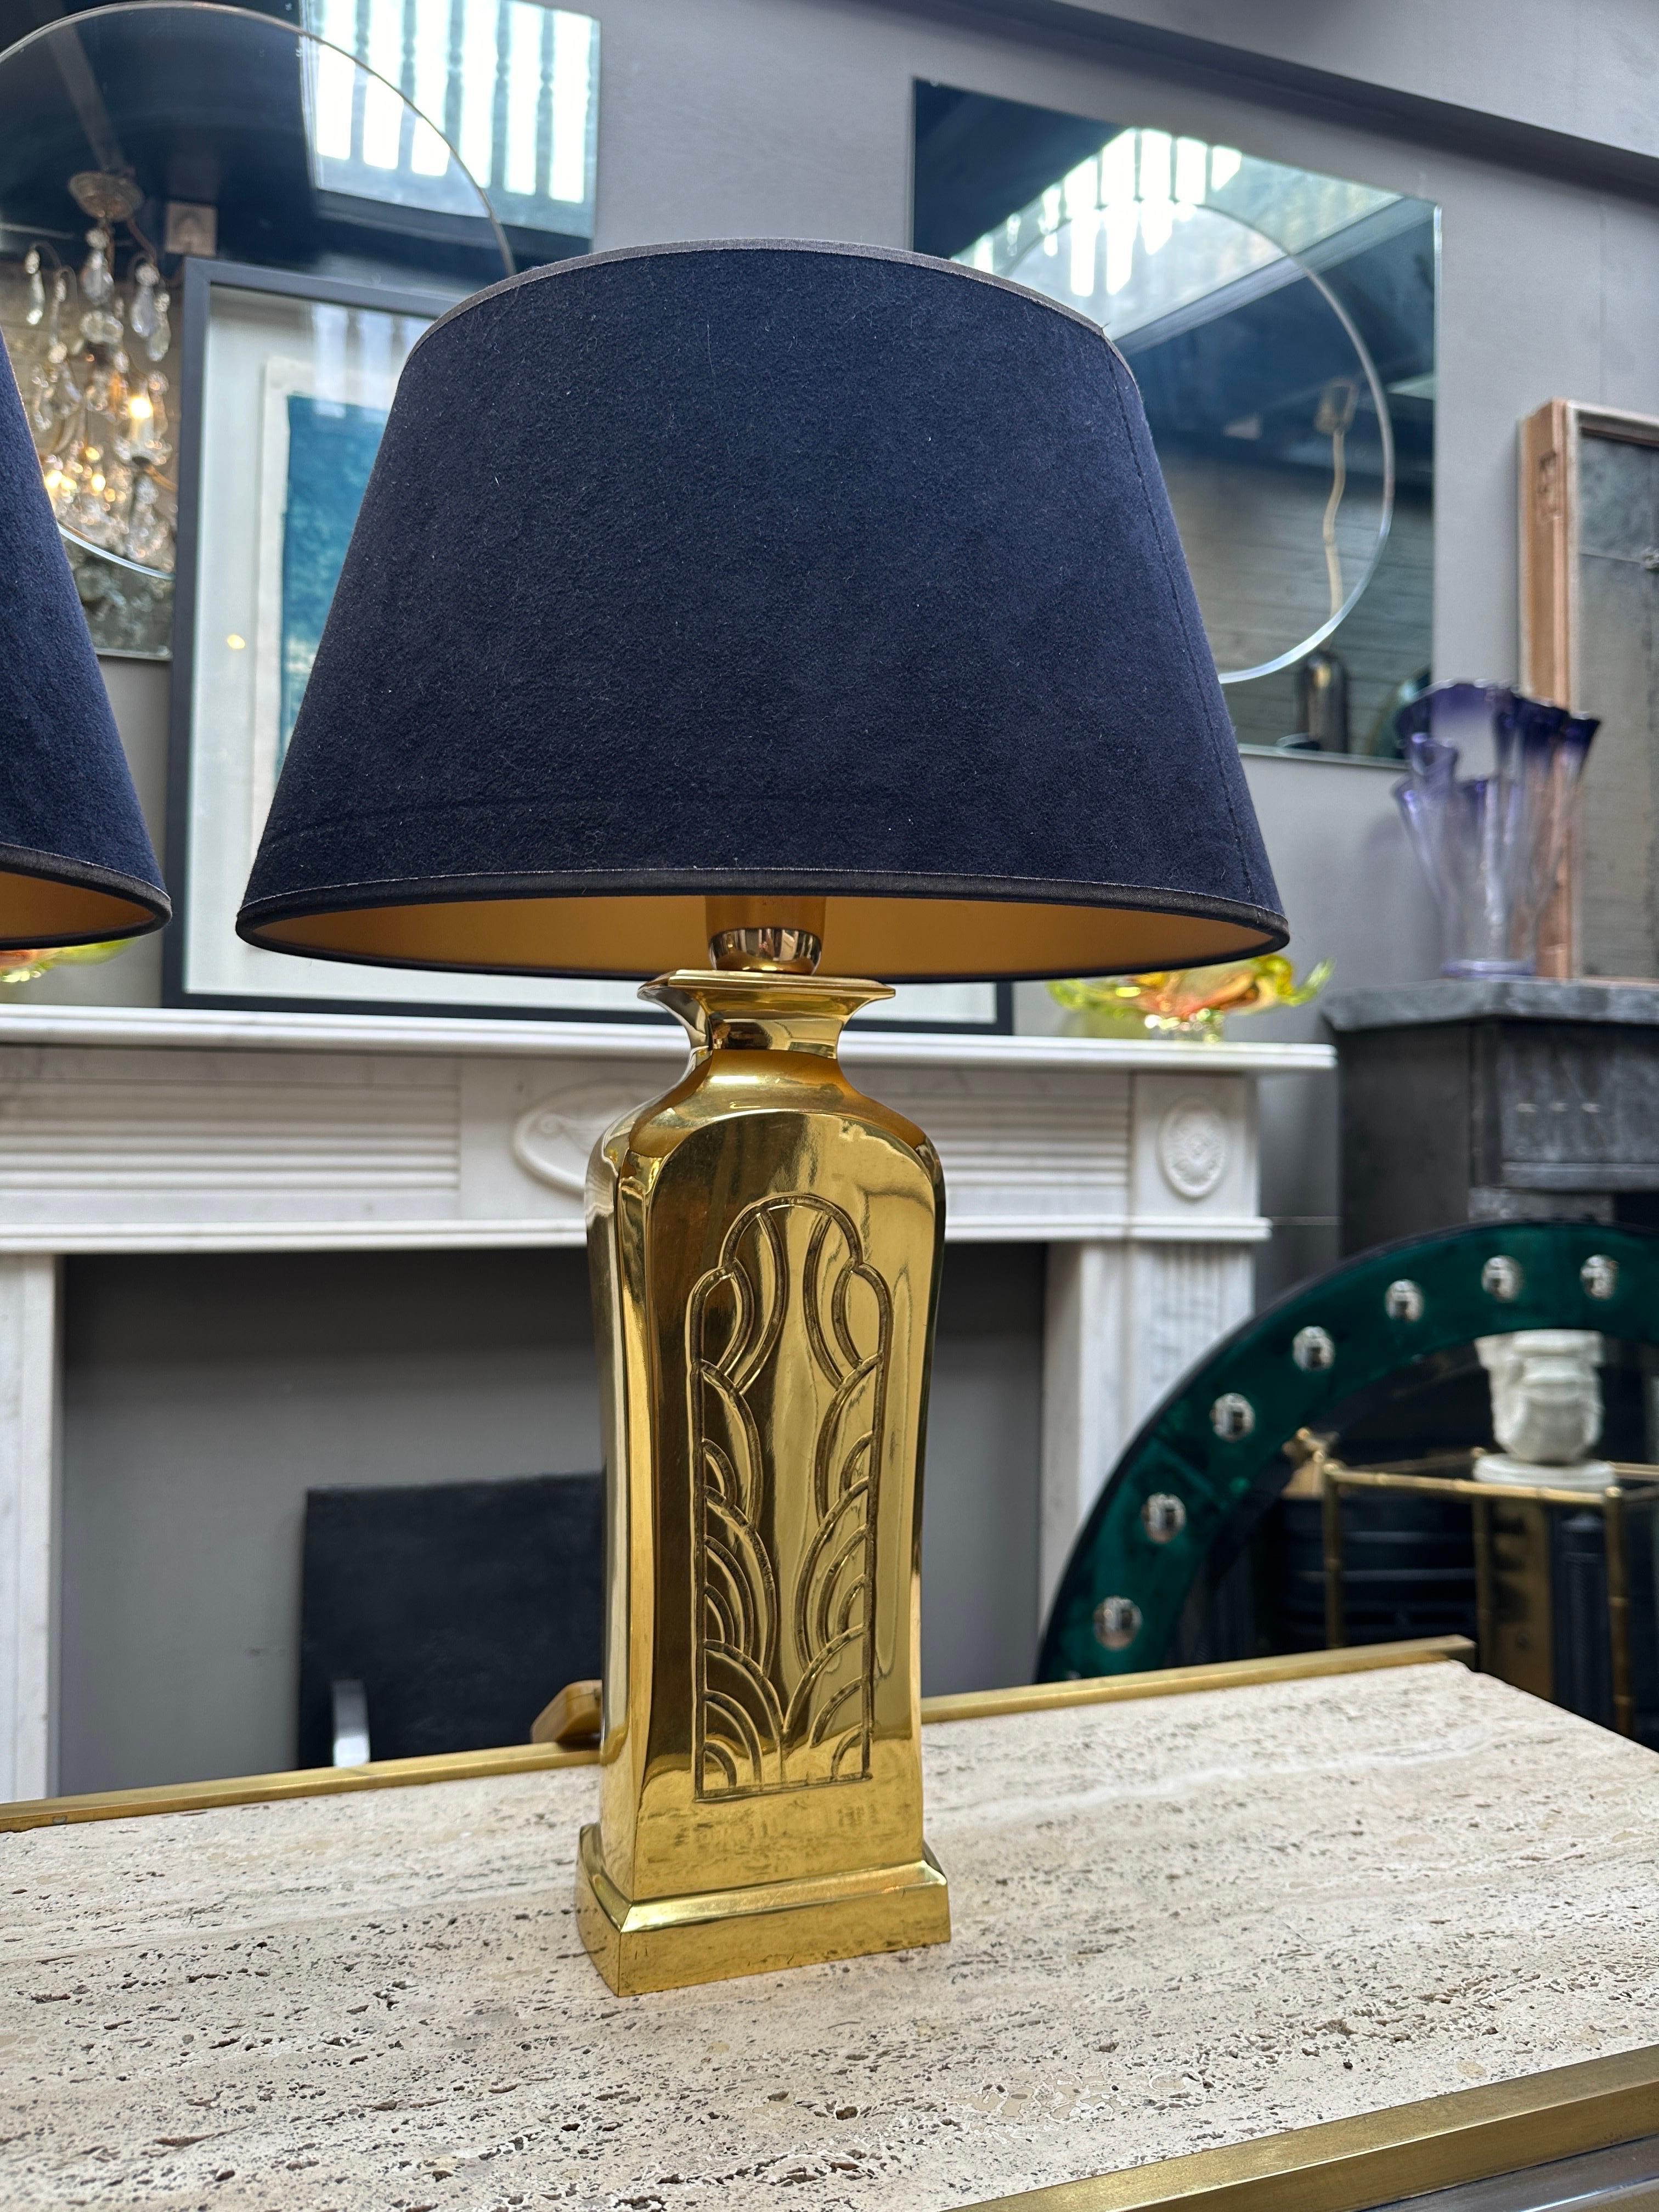 A pair of French polished cast brass table lamps with decorative pattern to facia, brushed cotton black shades with gold liner. Perfect for bedside lighting or smaller side or end tables. original shades and good quality lamps 